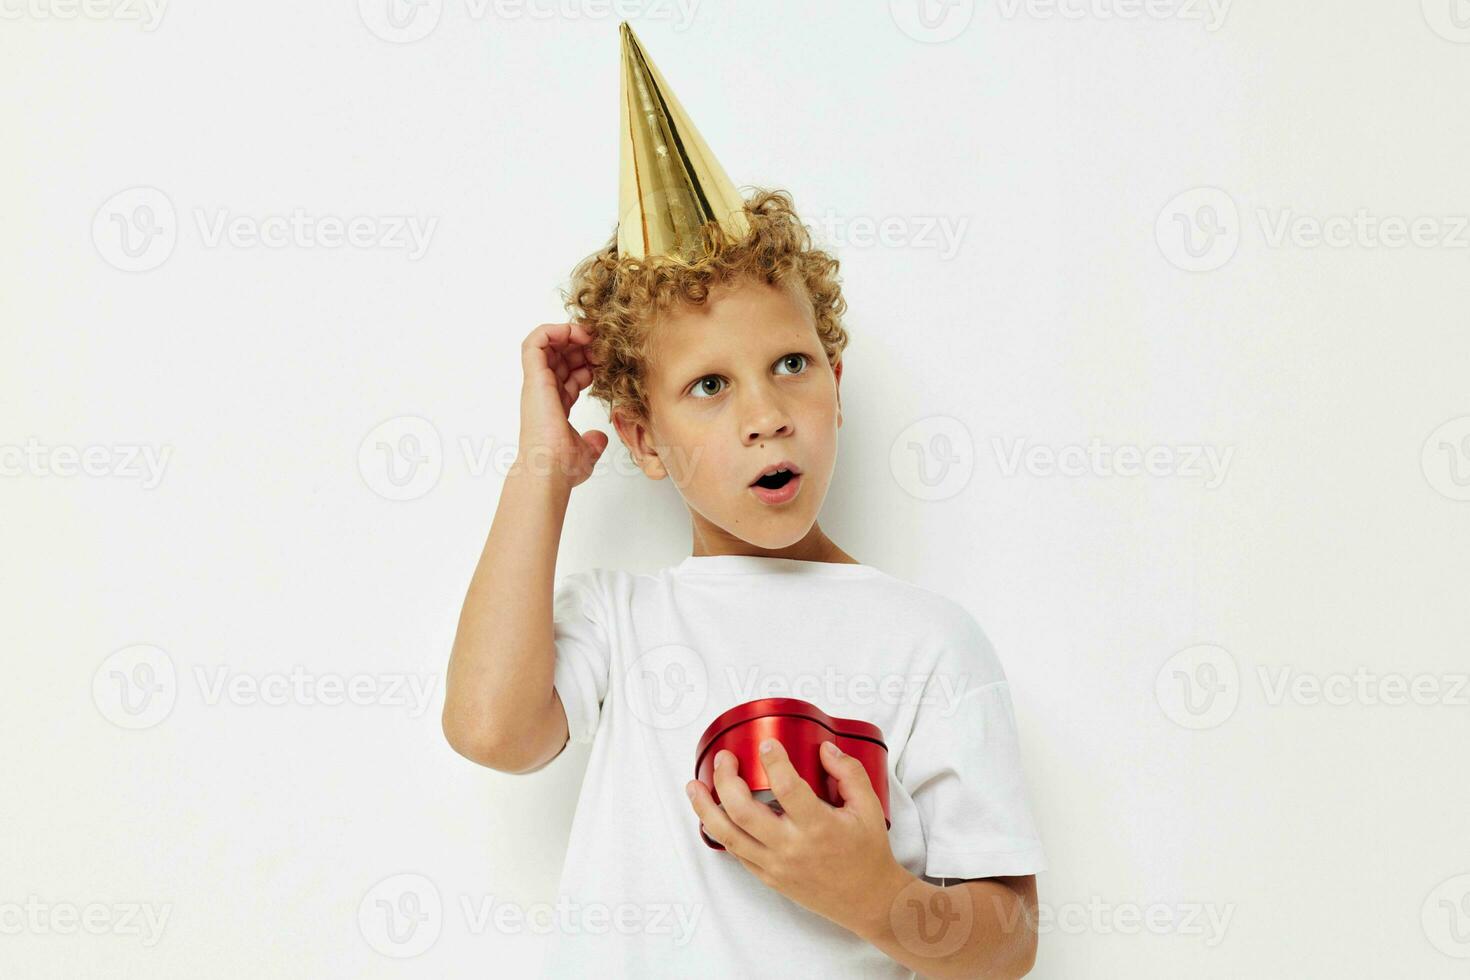 little boy wearing a white t-shirt with a cap on his head birthday gift photo